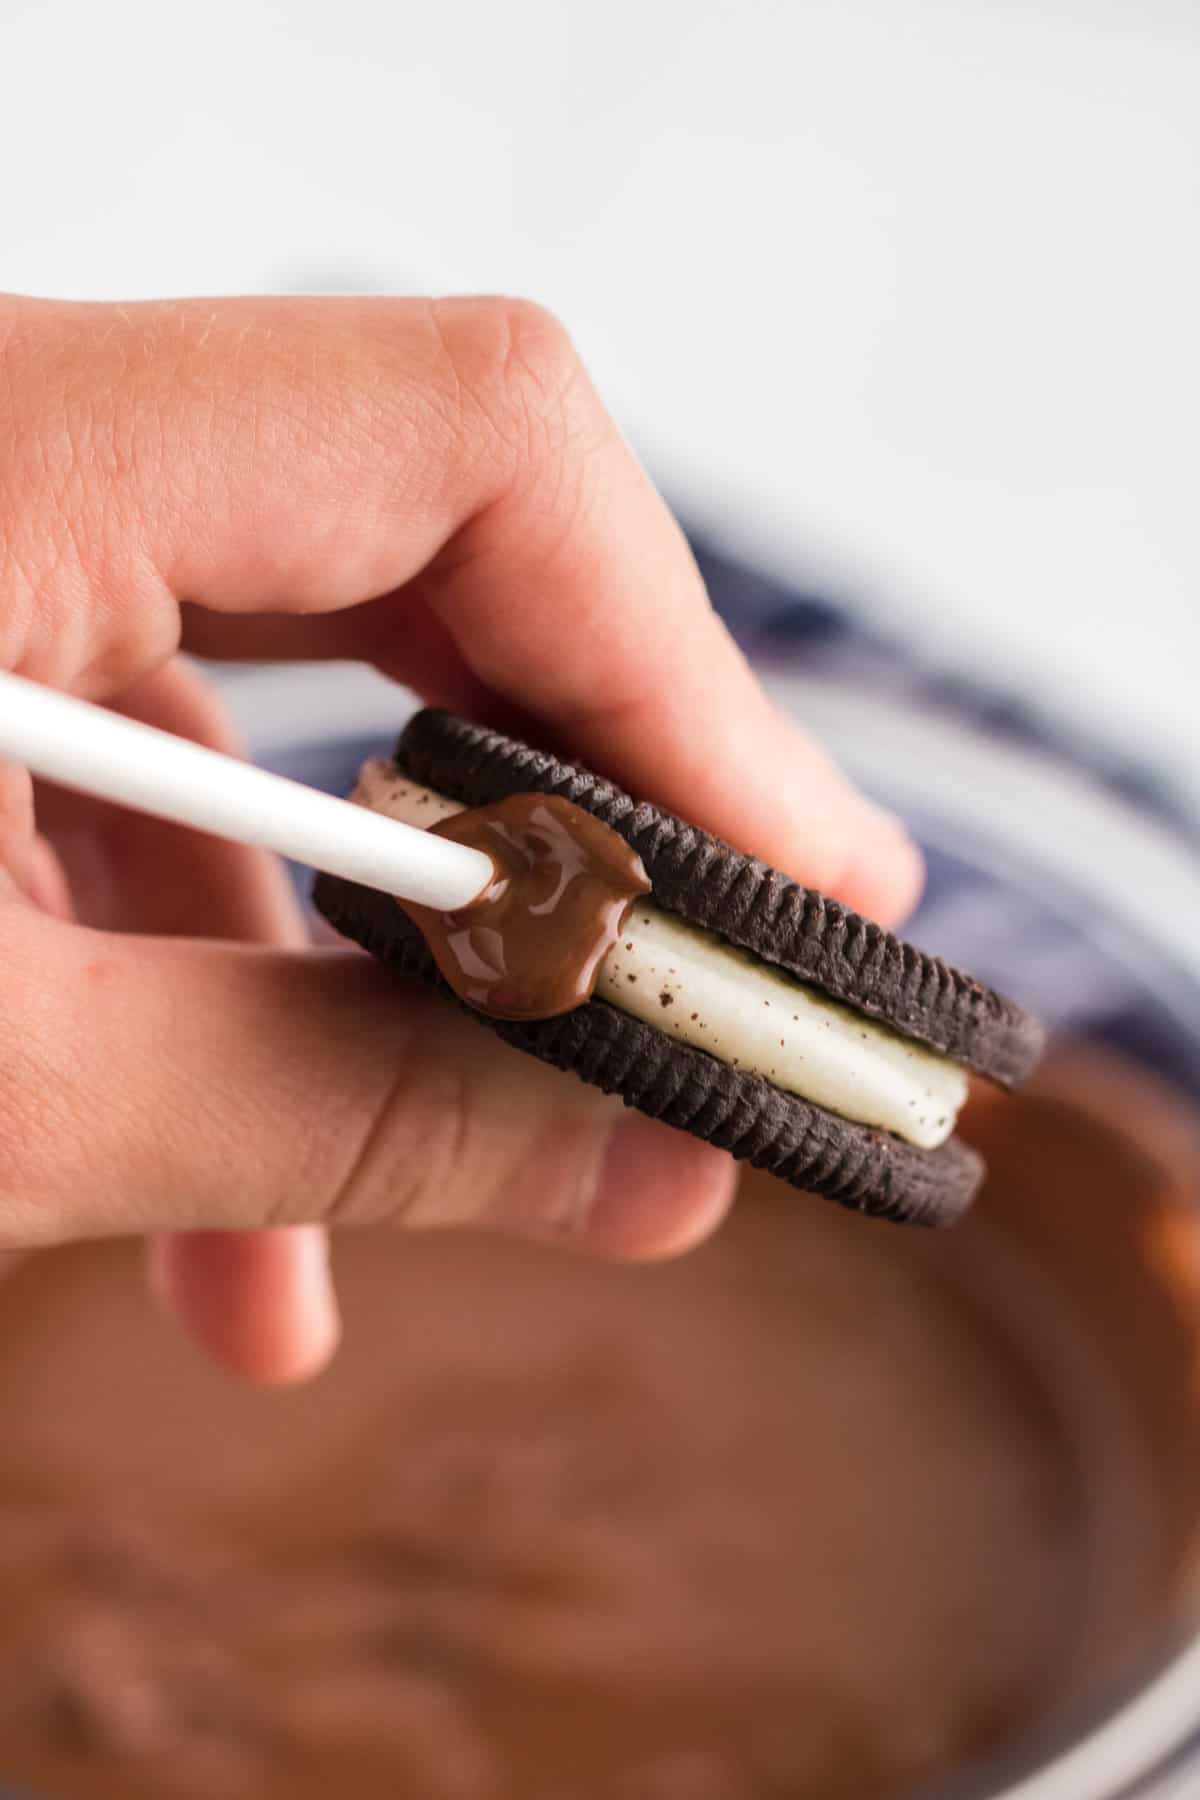 Sticking the Chocolate Covered End in the Oreo "Stuf"